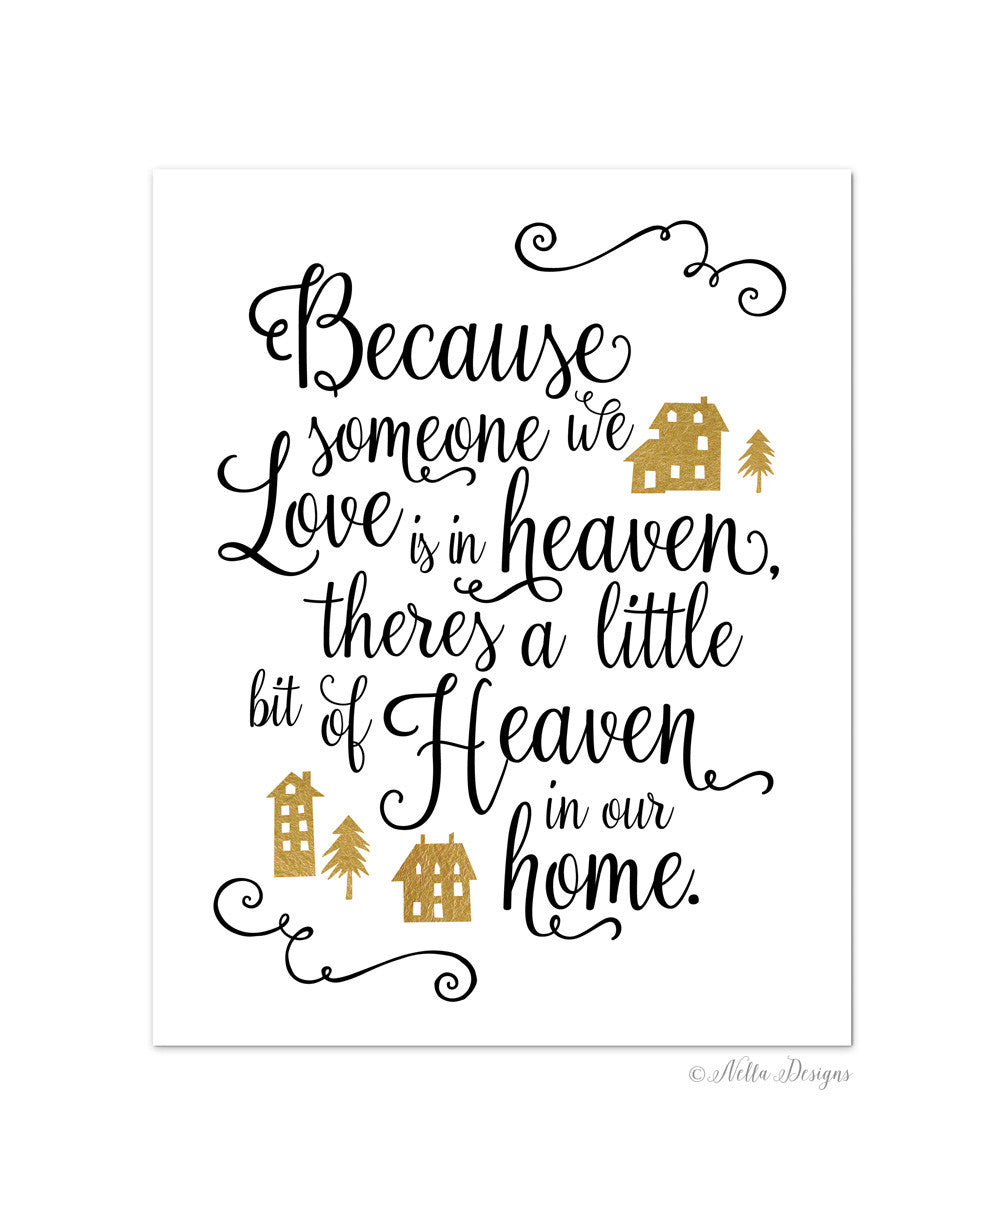 Because someone we love is in heaven print